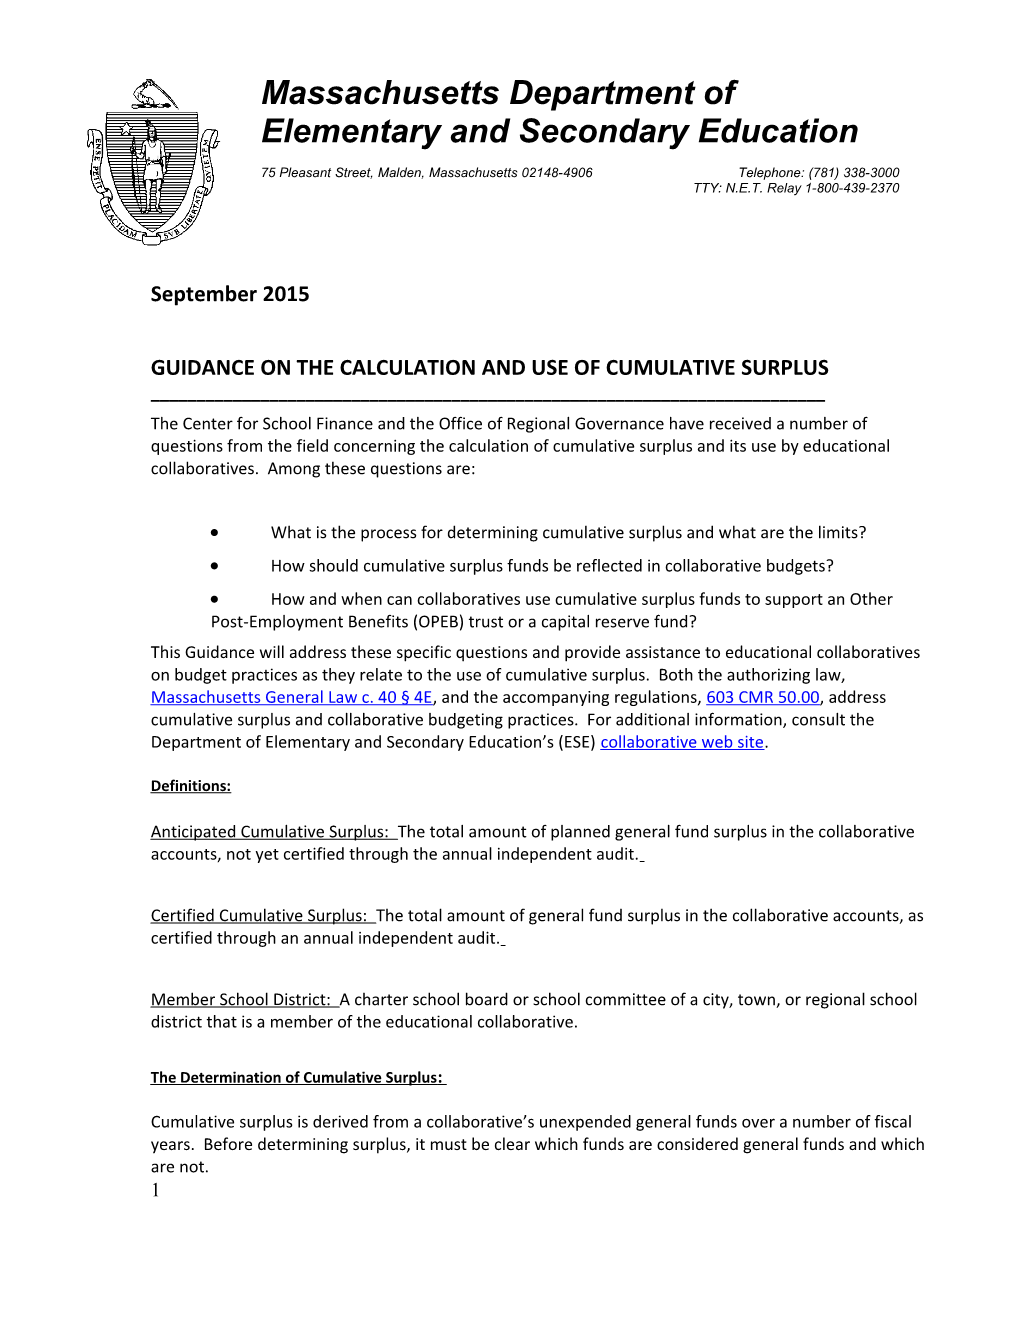 Guidance on the Calculation and Use of Cumulative Surplus